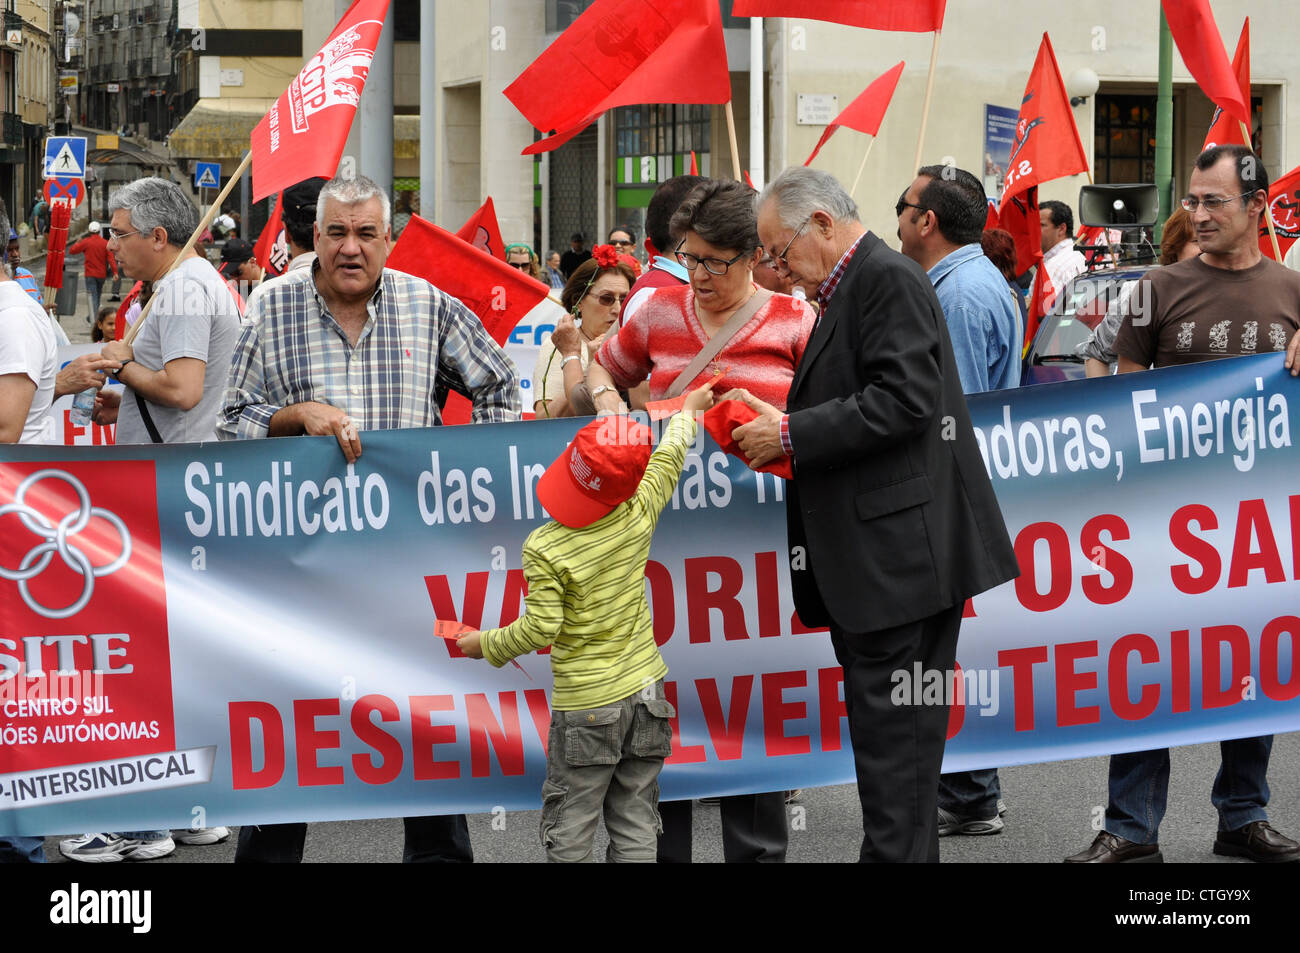 May 1 - Workers' Day demonstration in Lisbon, Portugal Stock Photo